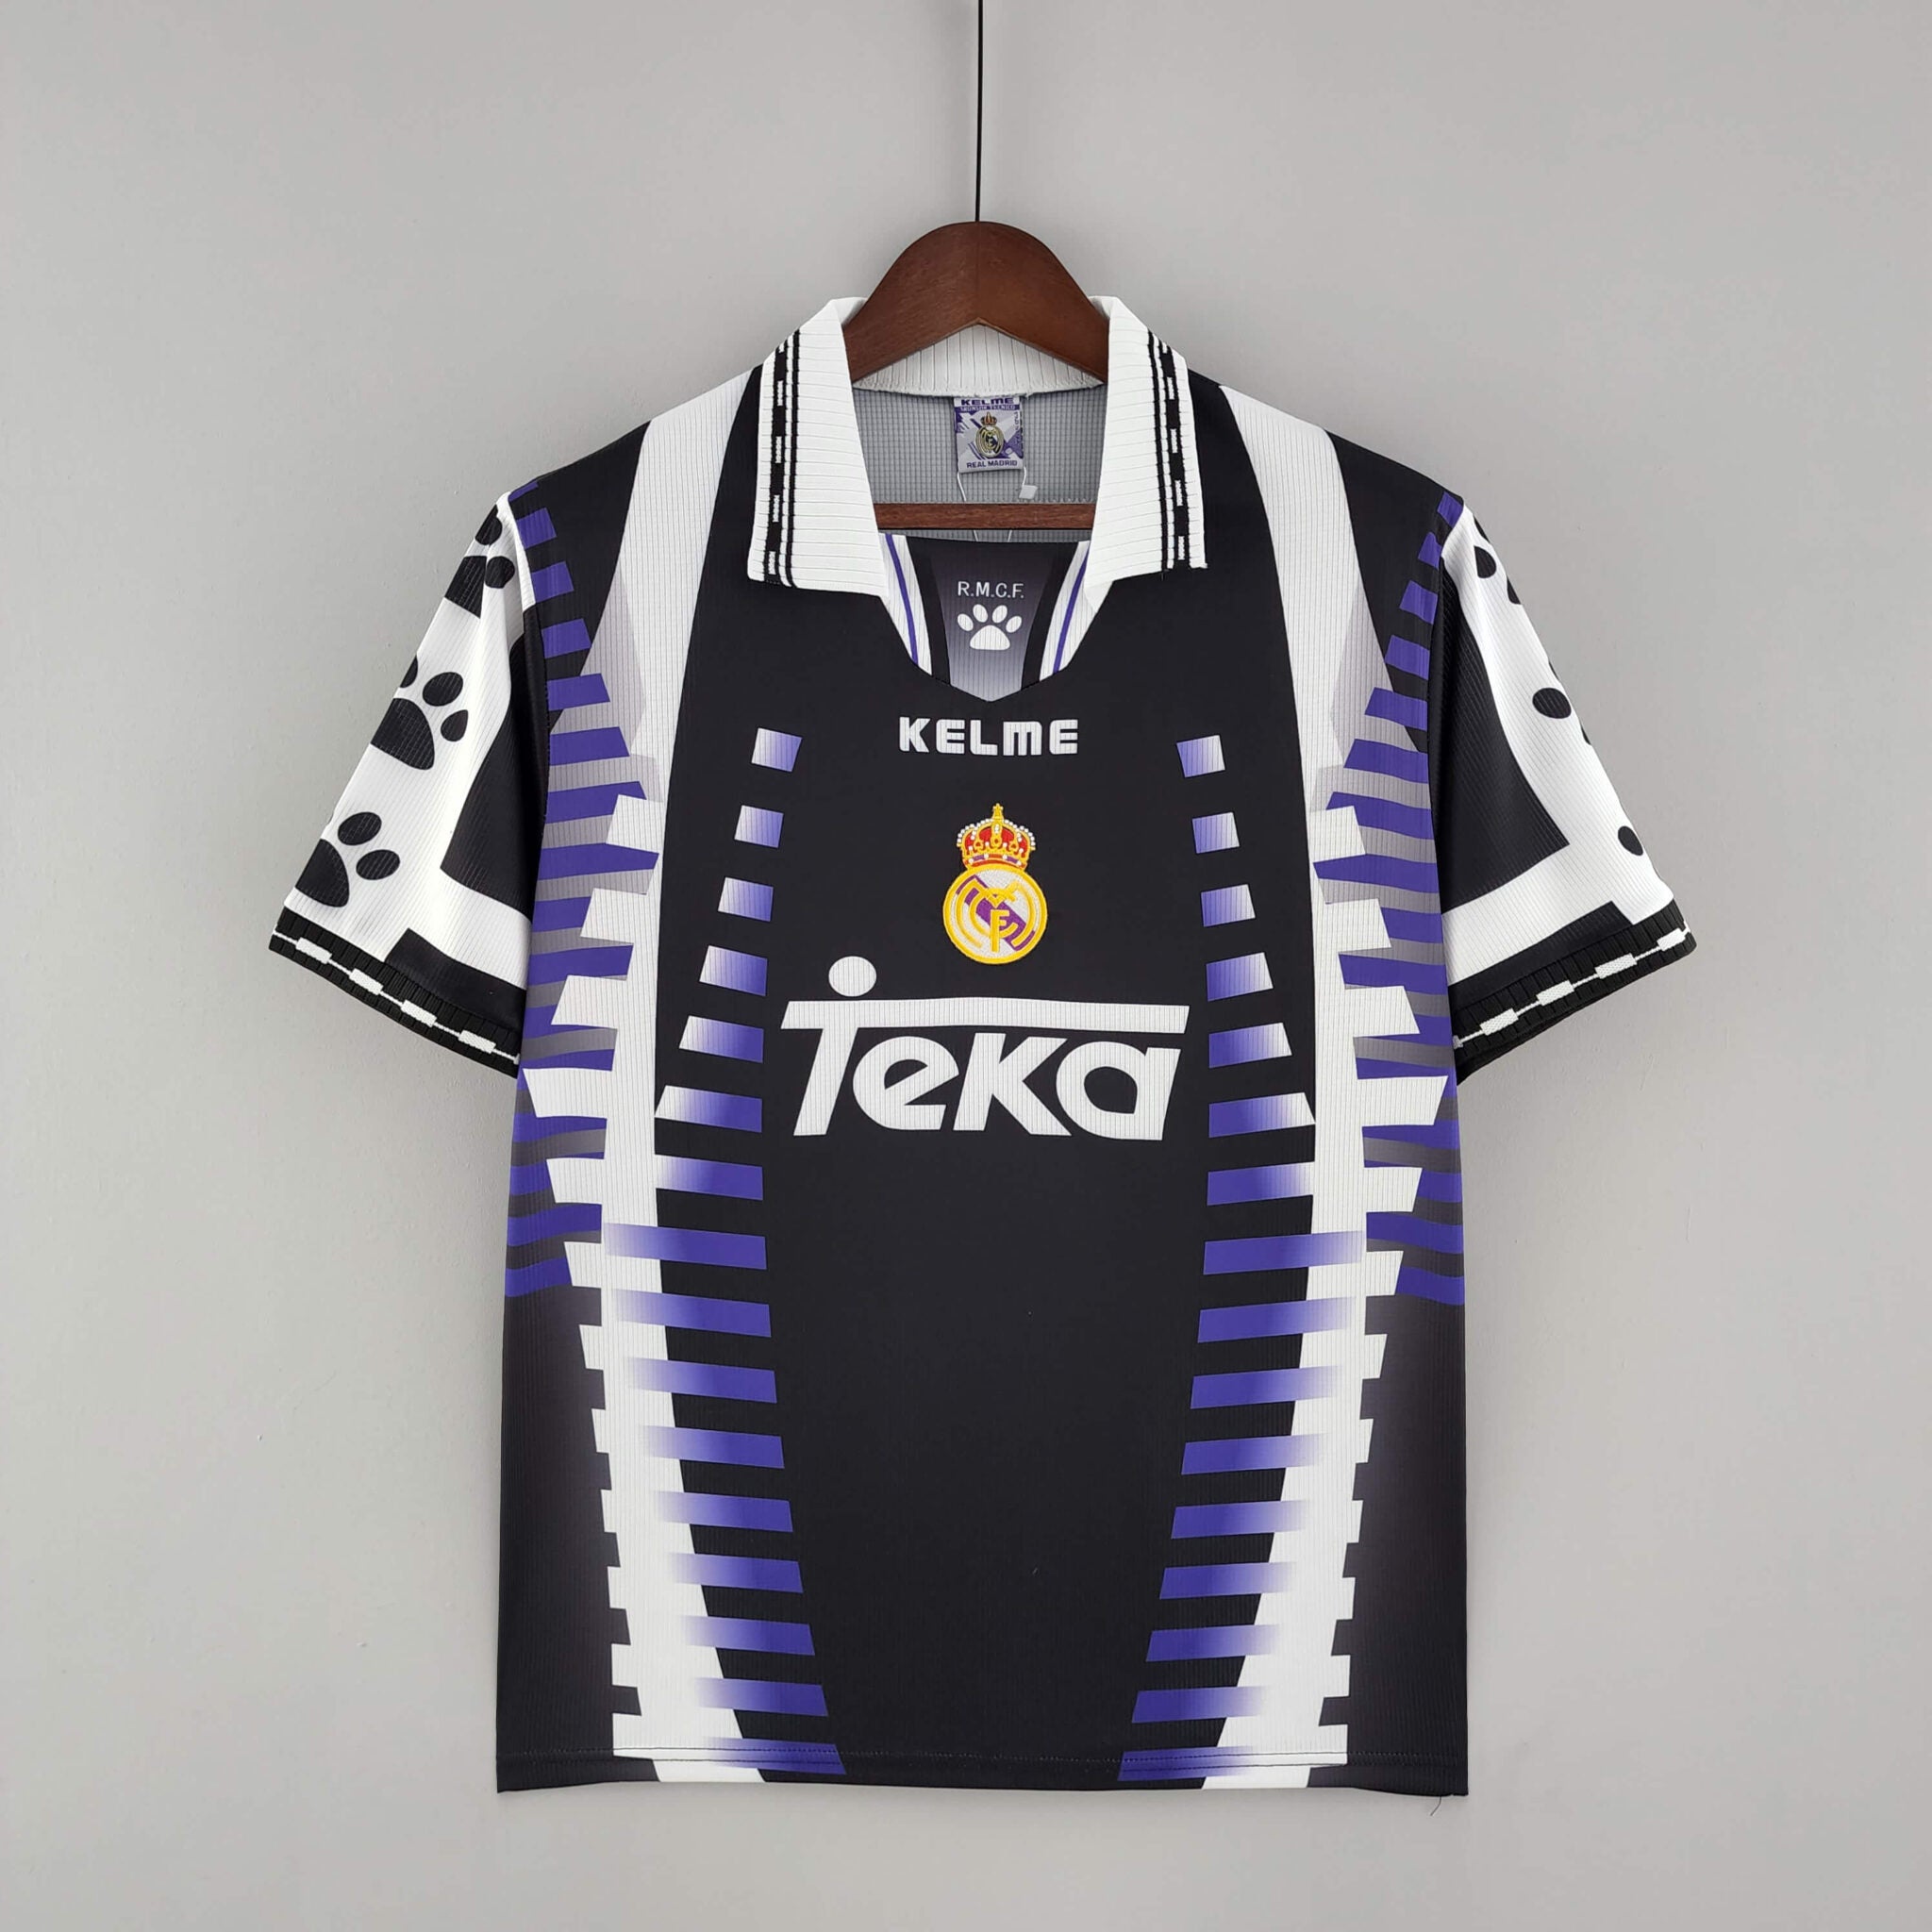 Real Madrid 1999-2000 Away Vintage Jersey [Free Shipping]